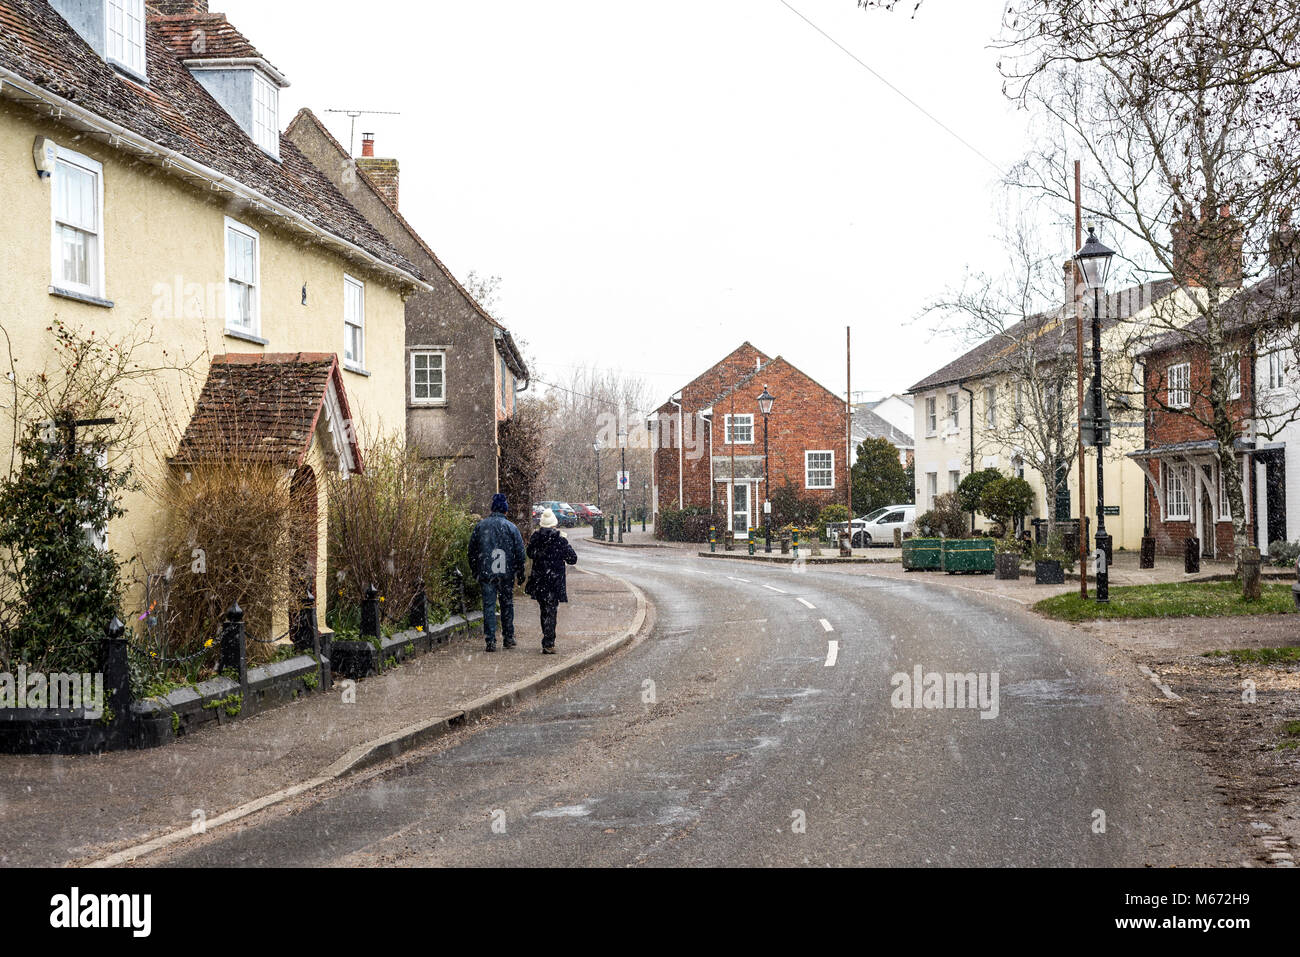 A couple walking down Church Street, Fordingbridge, New Forest, Hampshire, UK, in winter with light snow falling. Stock Photo